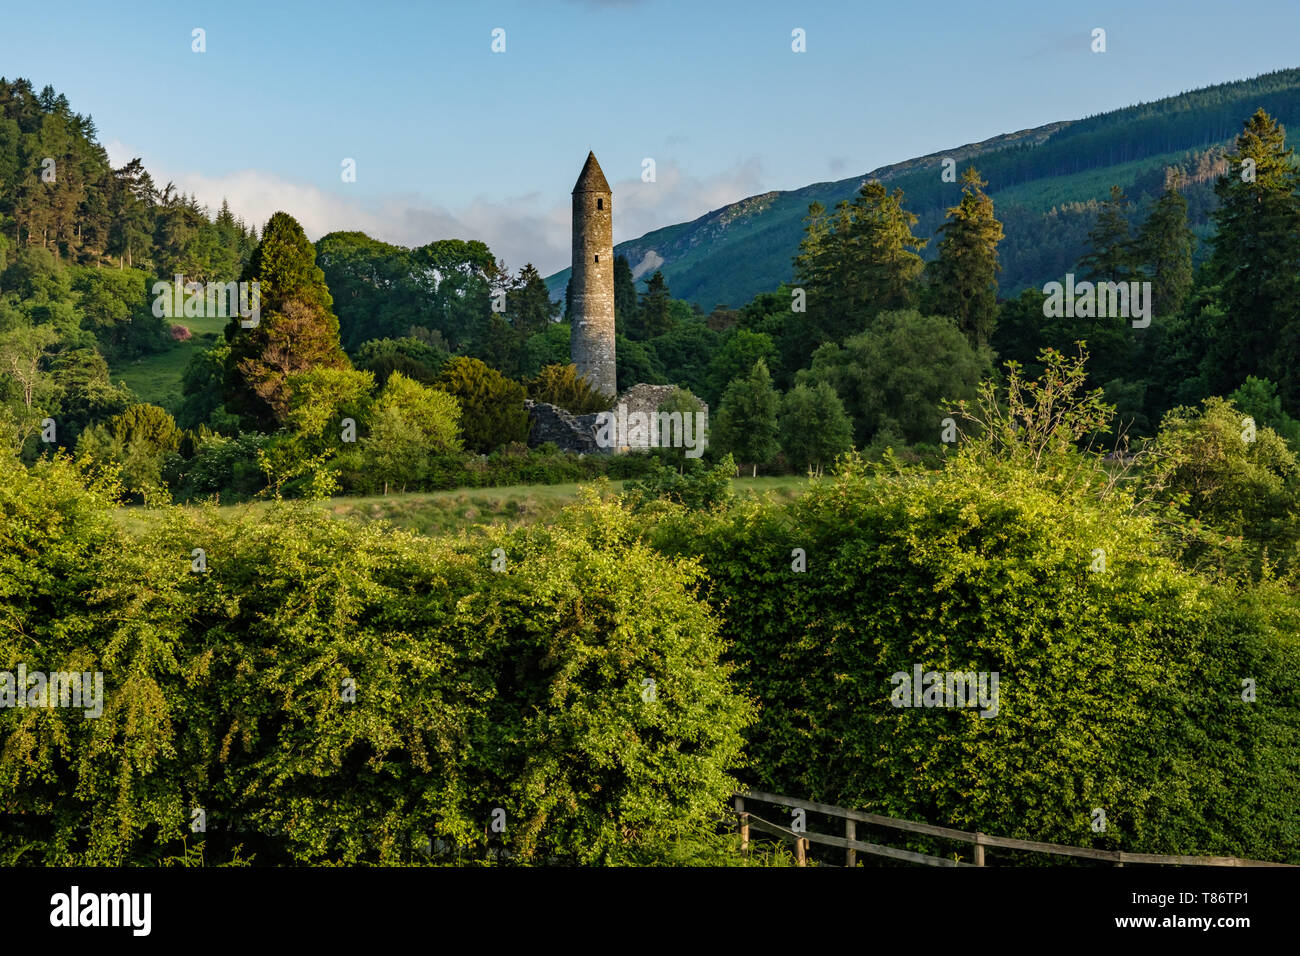 Round tower at the Glendalough ancient monastic site in Ireland receiving the morning sunrise. Stock Photo